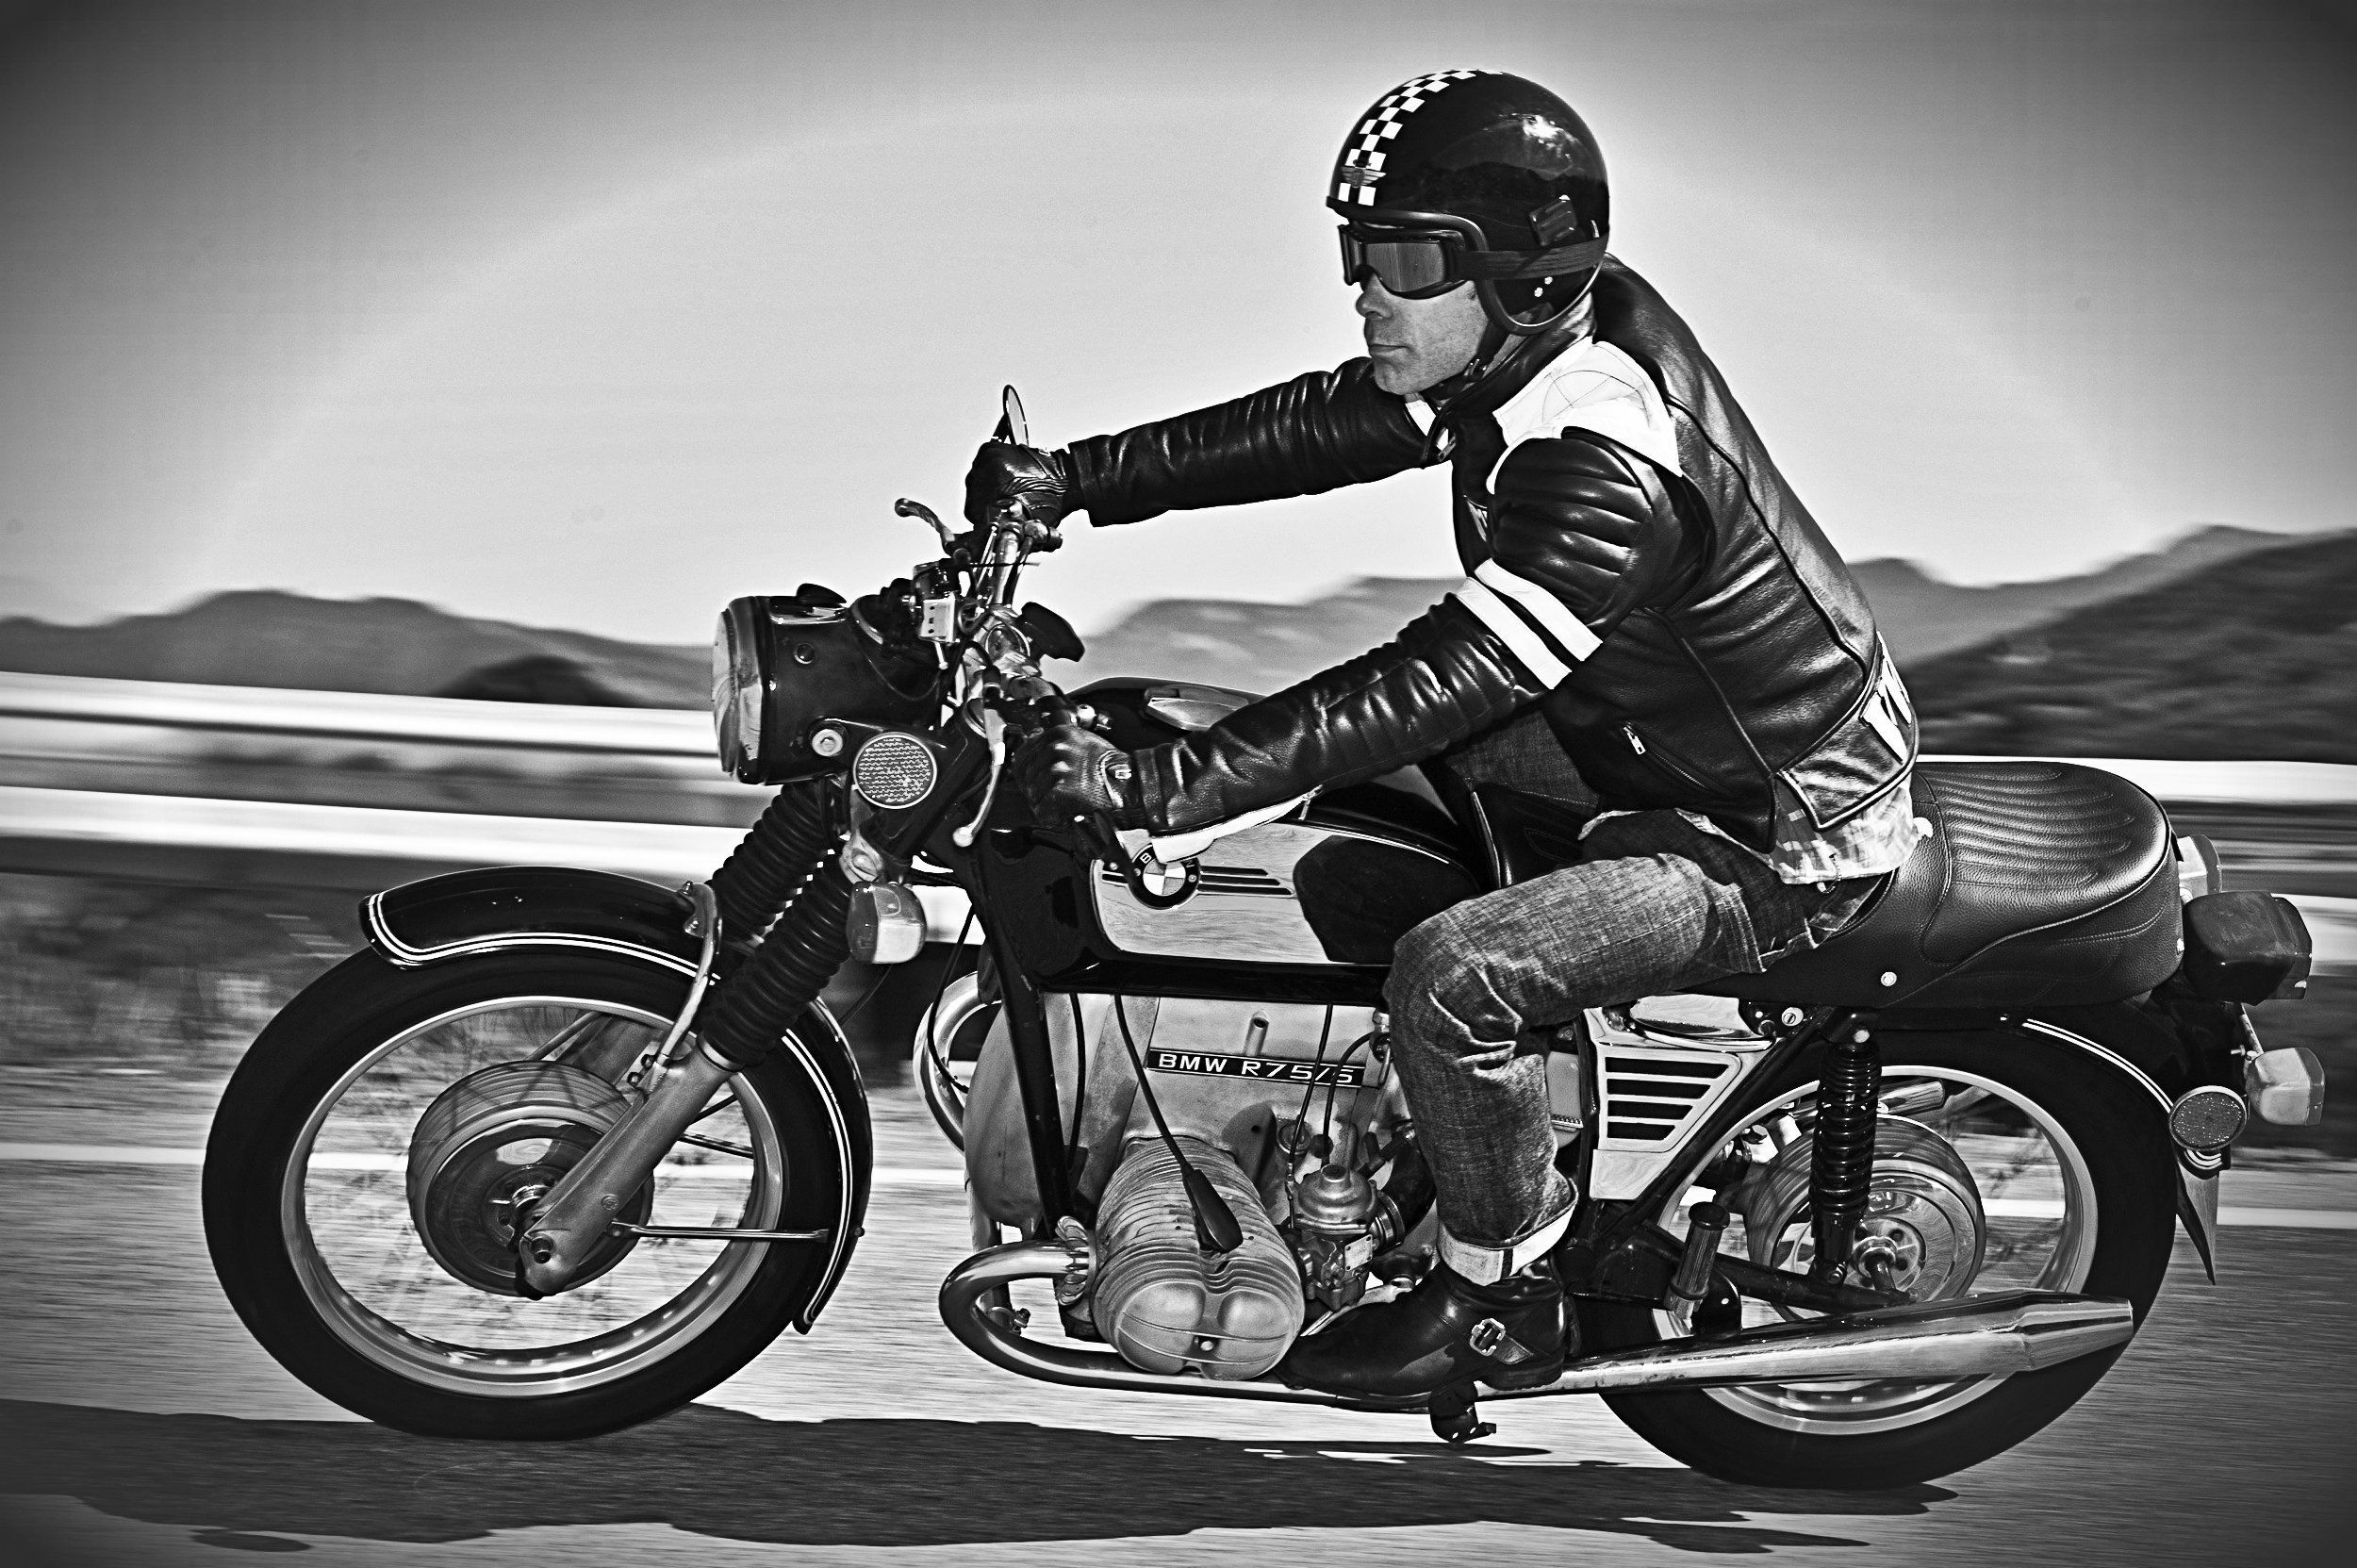 Vintage Motorcycle Wallpaper High Quality. Motorcycle wallpaper